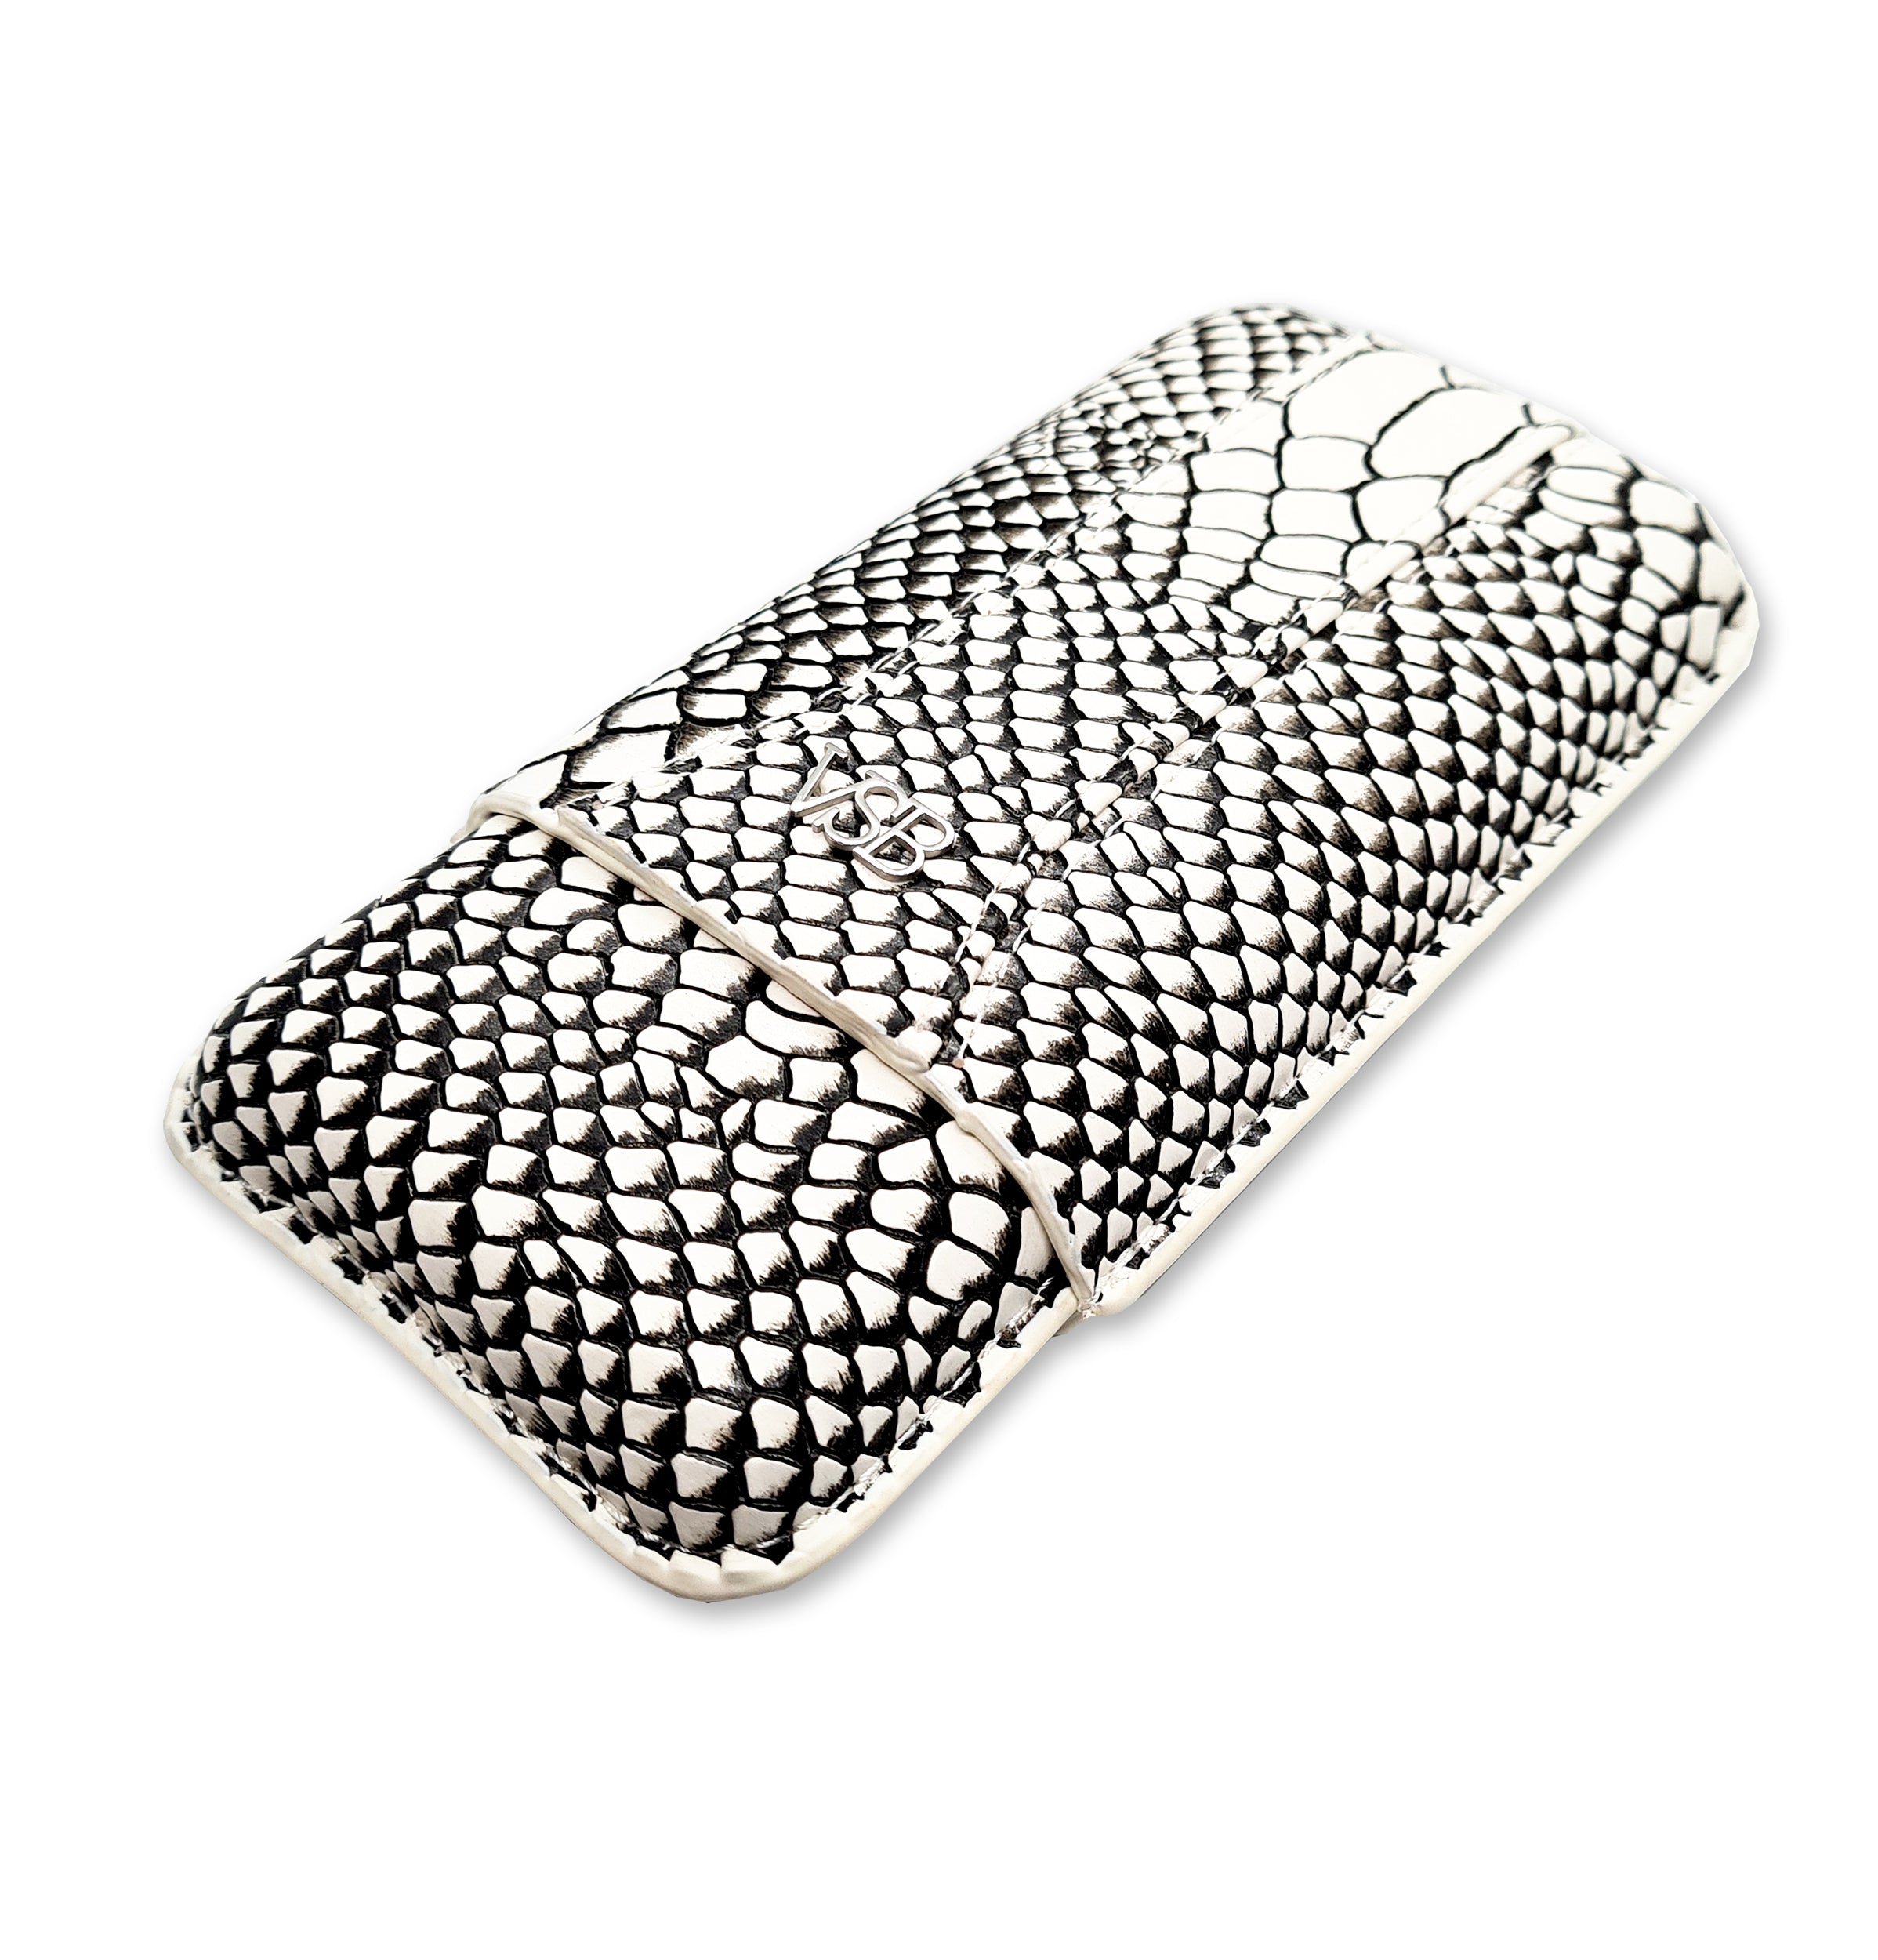 Three Finger Snake Skin Leather Cigar Pouch